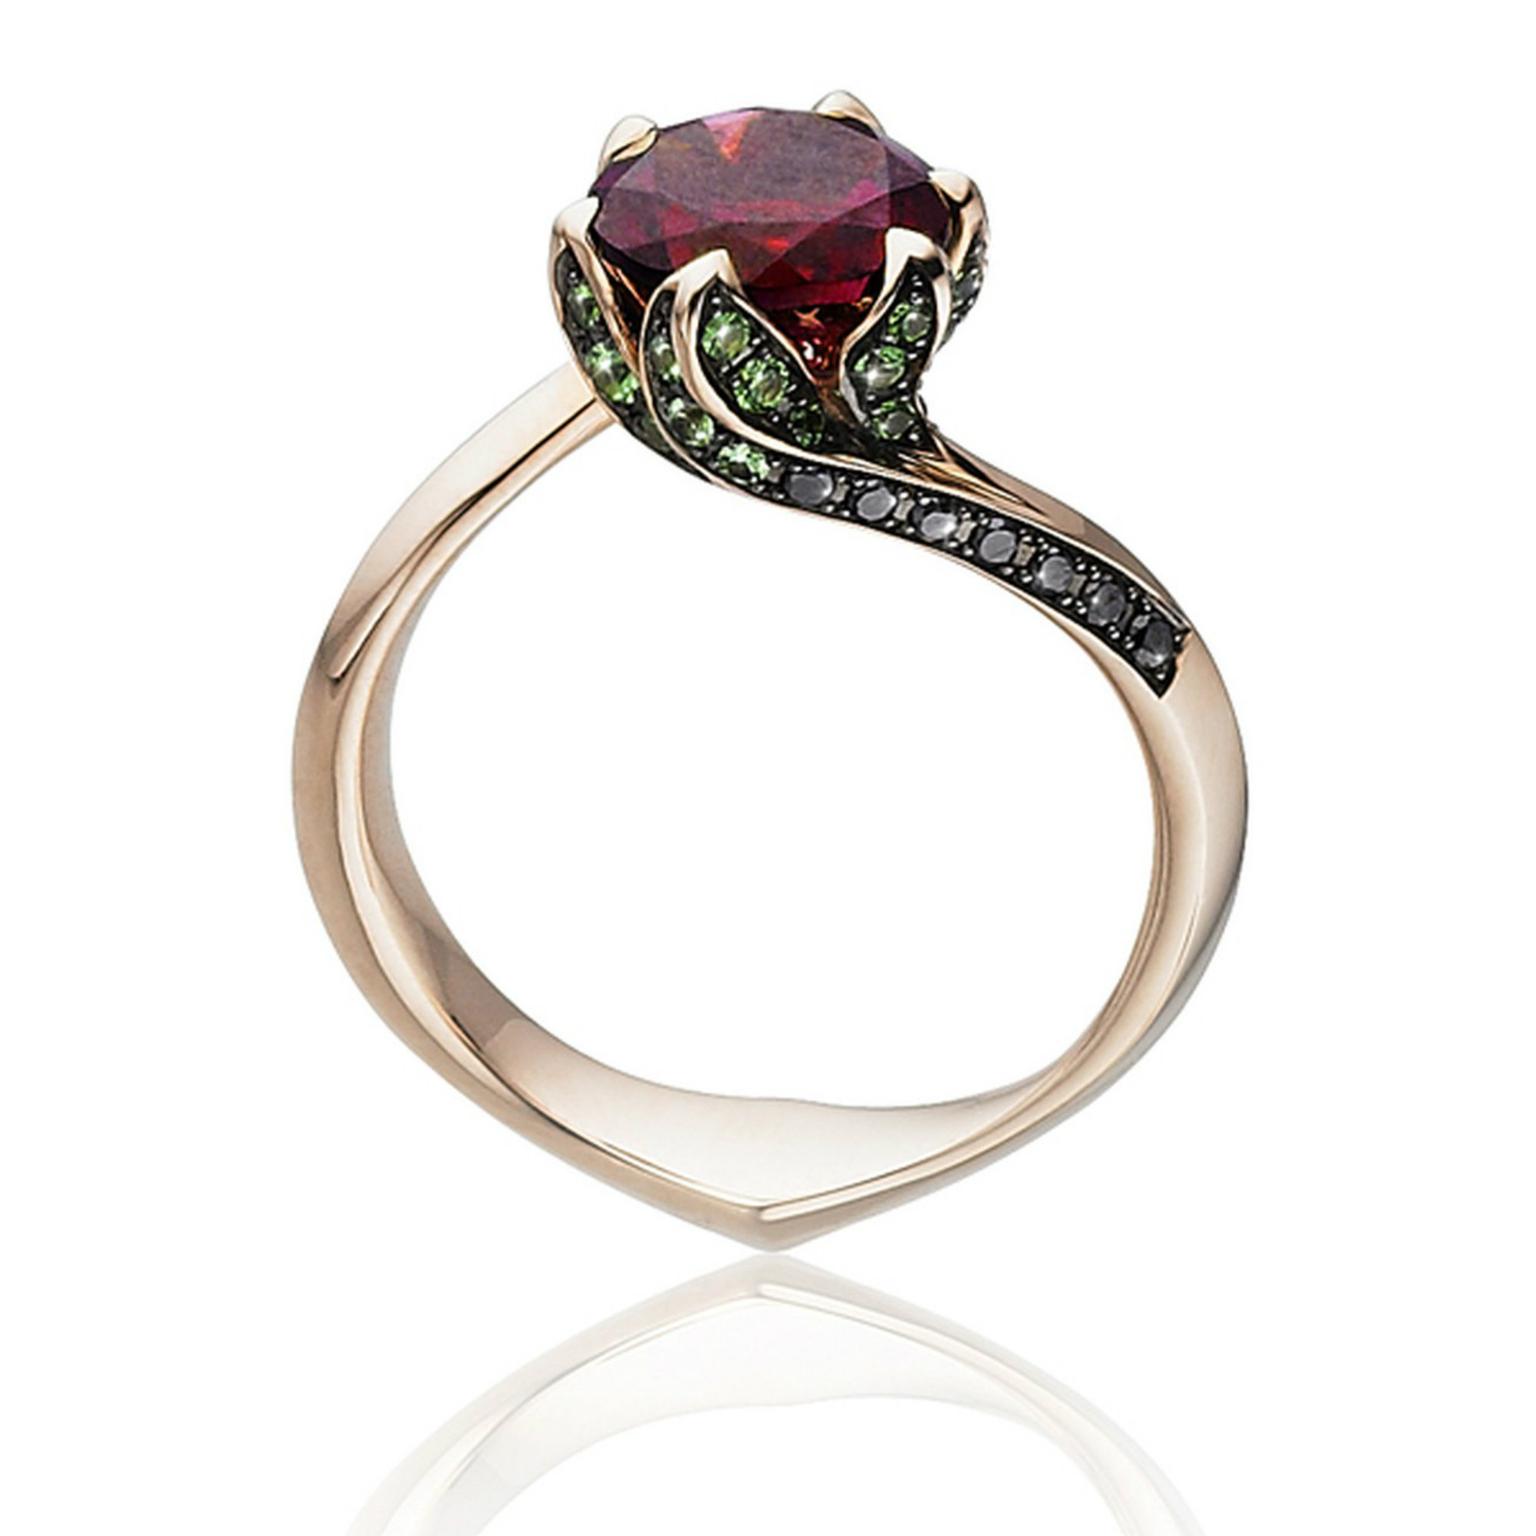 Beauty and The Beast rubellite ring in rose gold | Tomasz Donocik ...